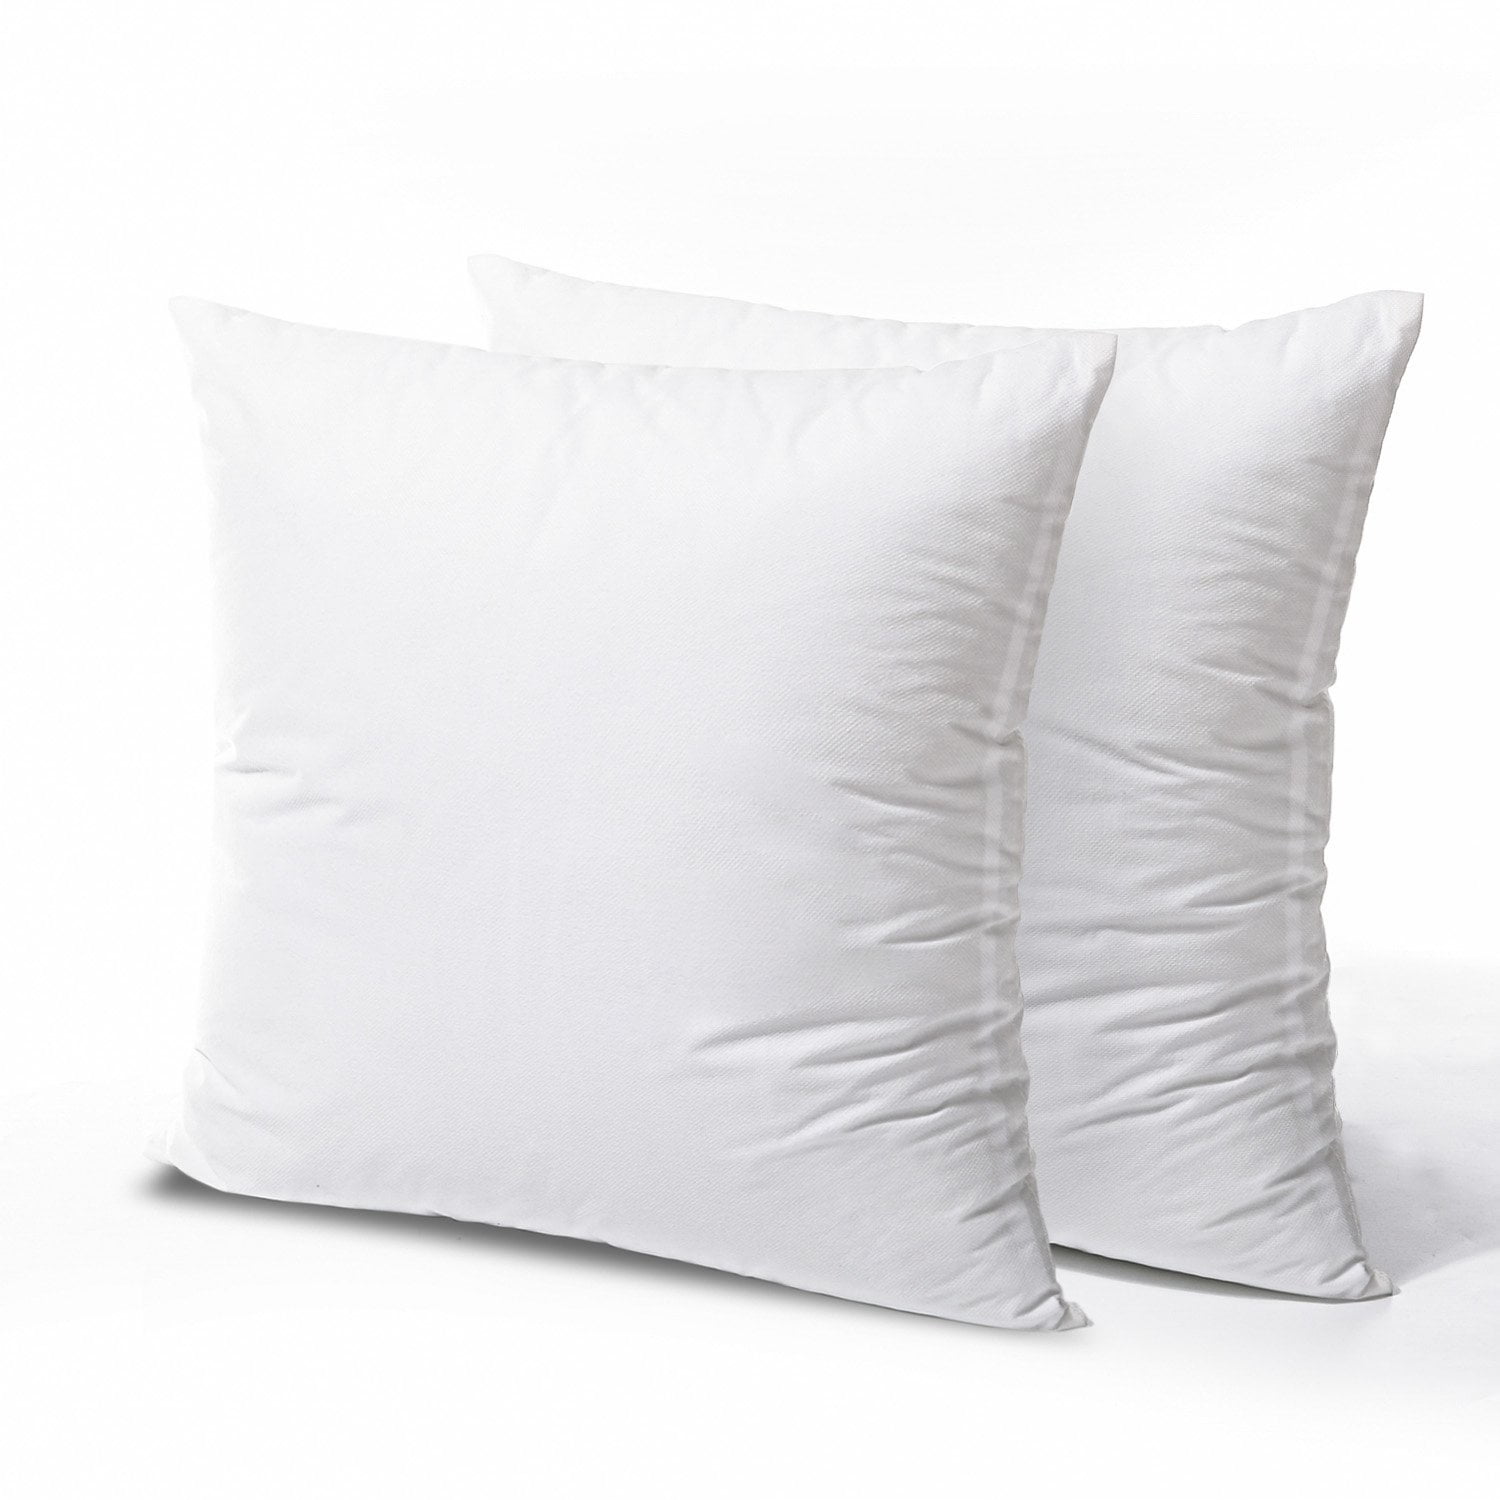  ETASOP Throw Pillows with Inserts Included 18x18, 2